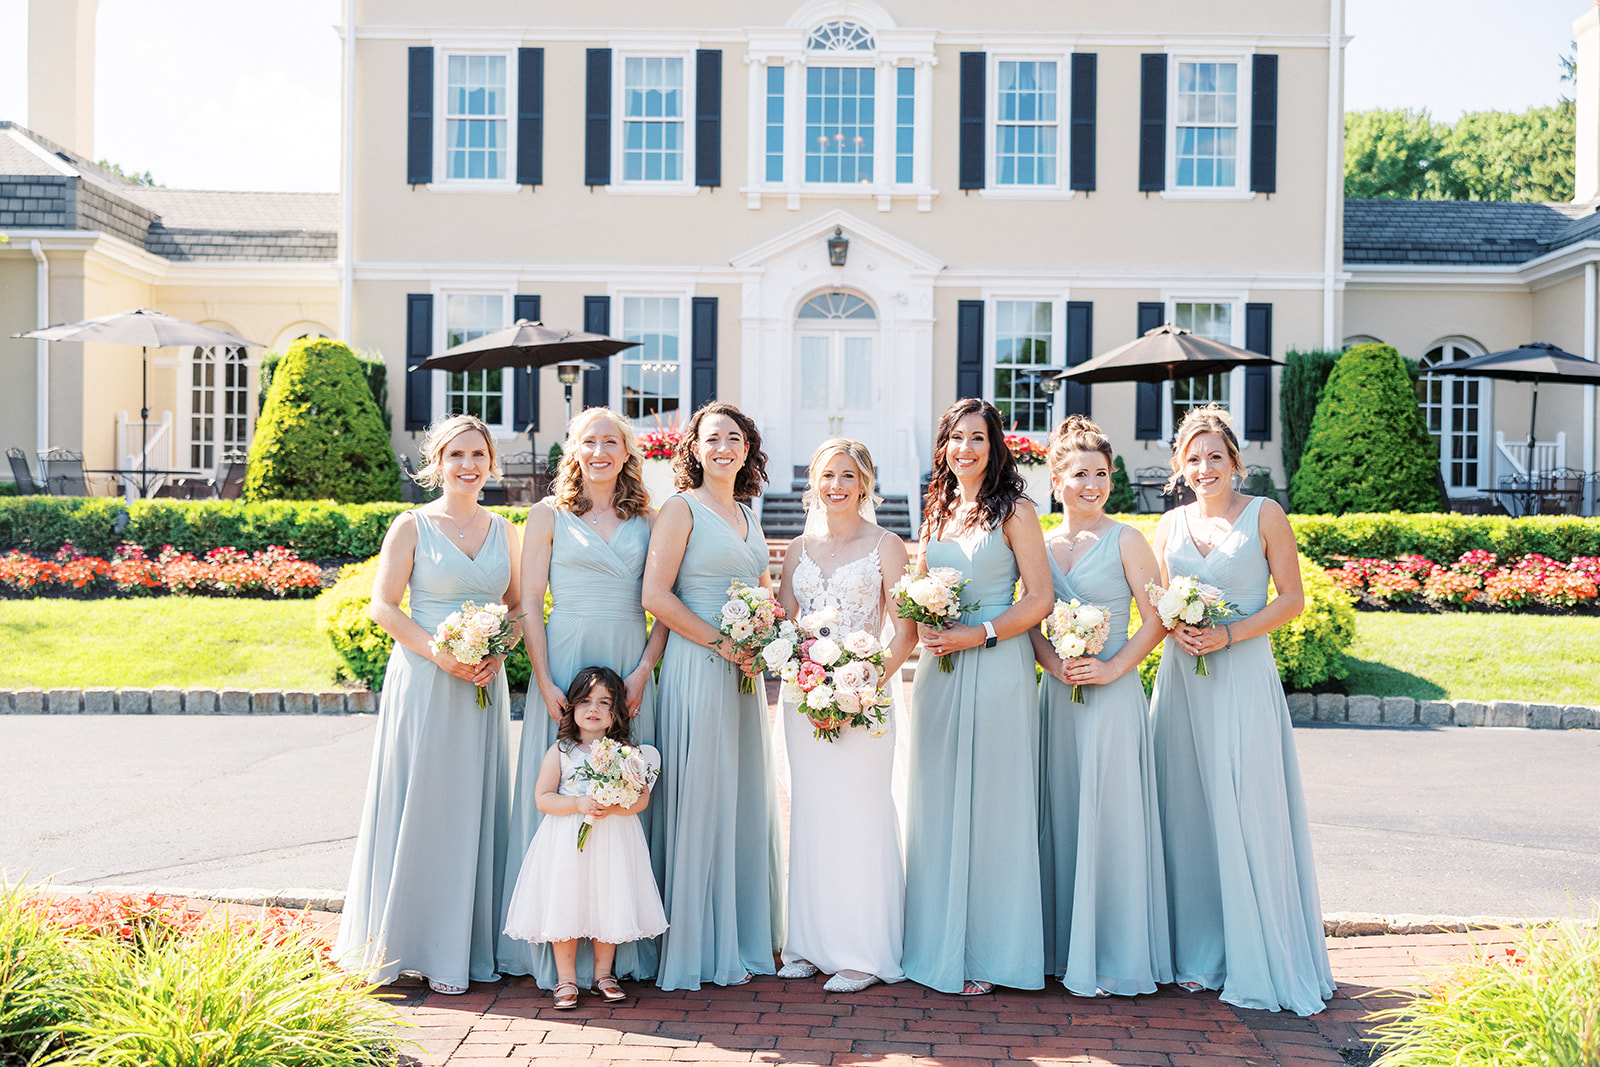 A bride stands with her bridesmaids and flower girl in blue dresses outside the front entrance of their venue